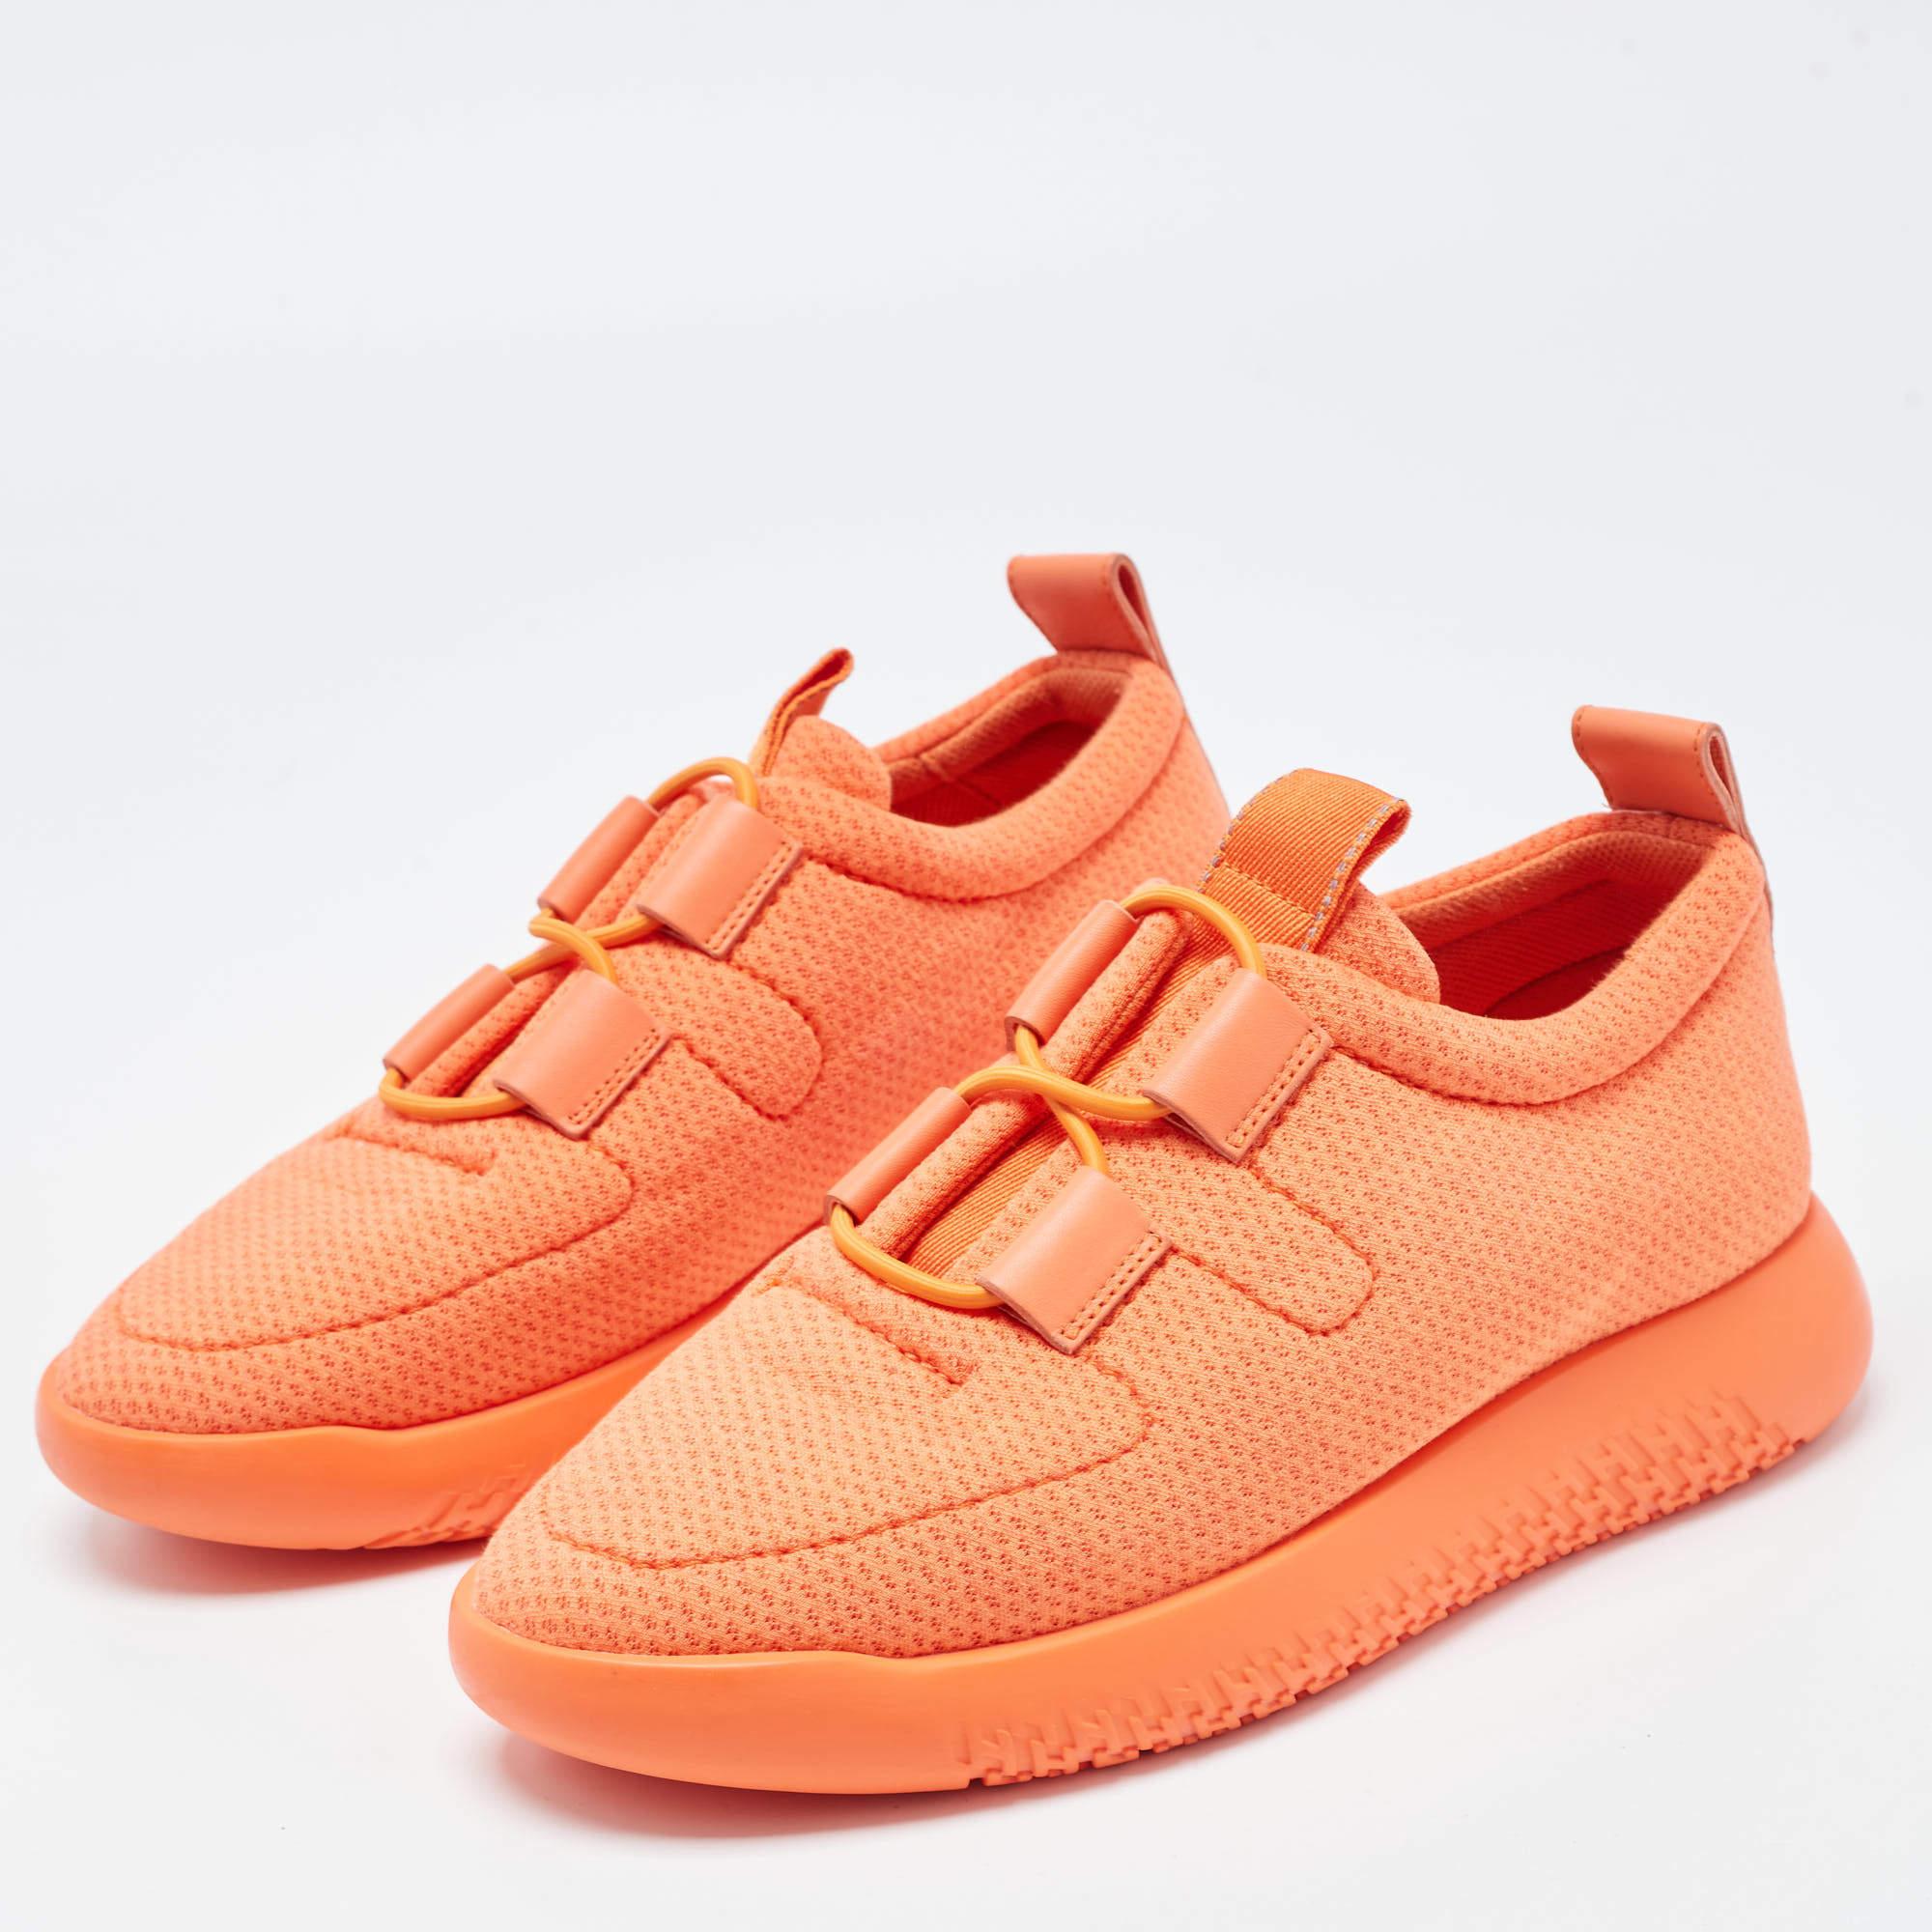 Hermès Orange Leather and Neoprene Low Top Sneakers Size 36 1